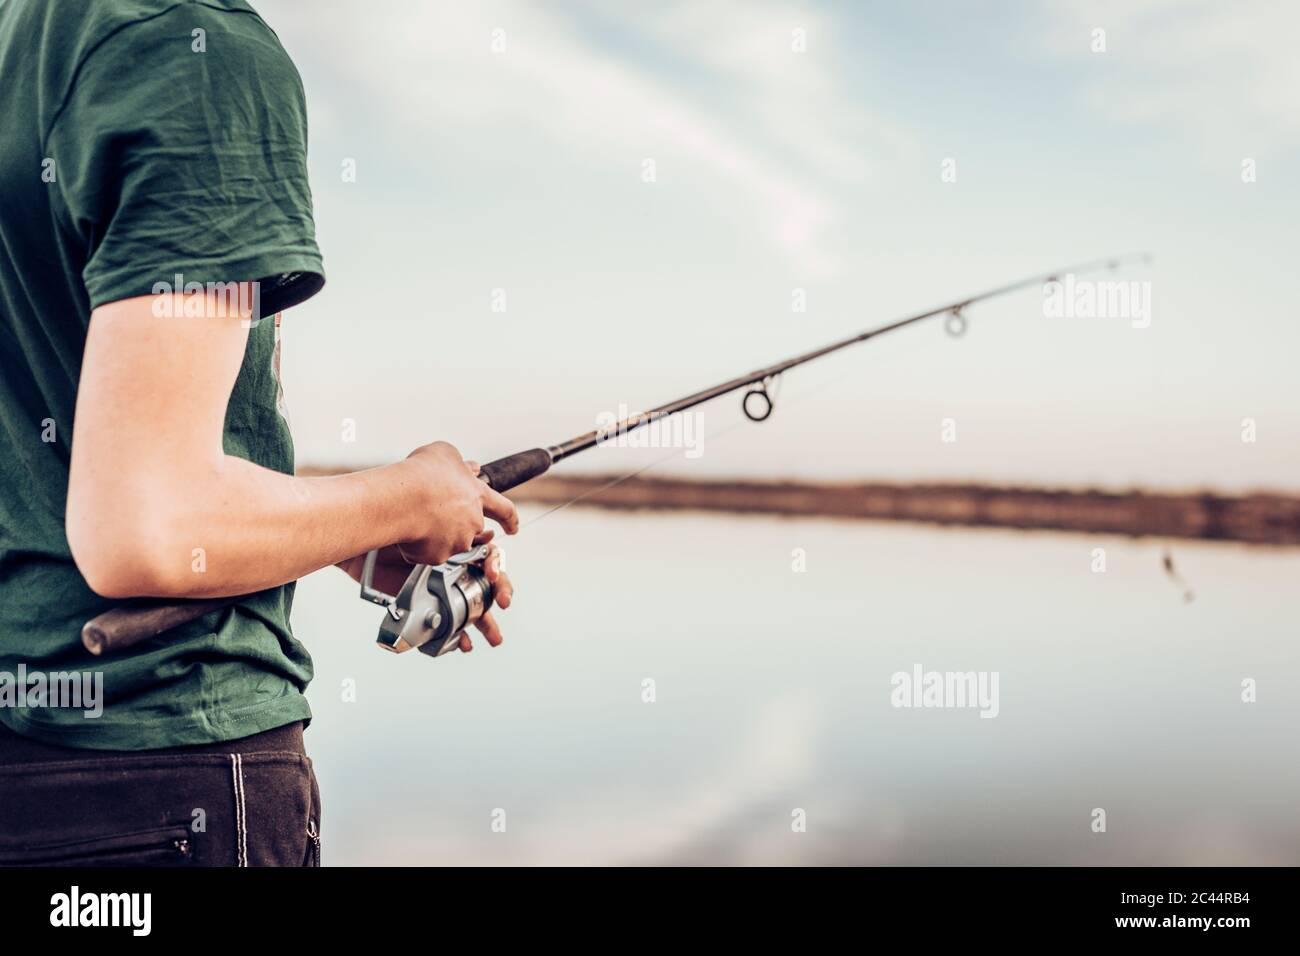 Midsection of teenage boy fishing with rod in lake while standing against cloudy sky Stock Photo